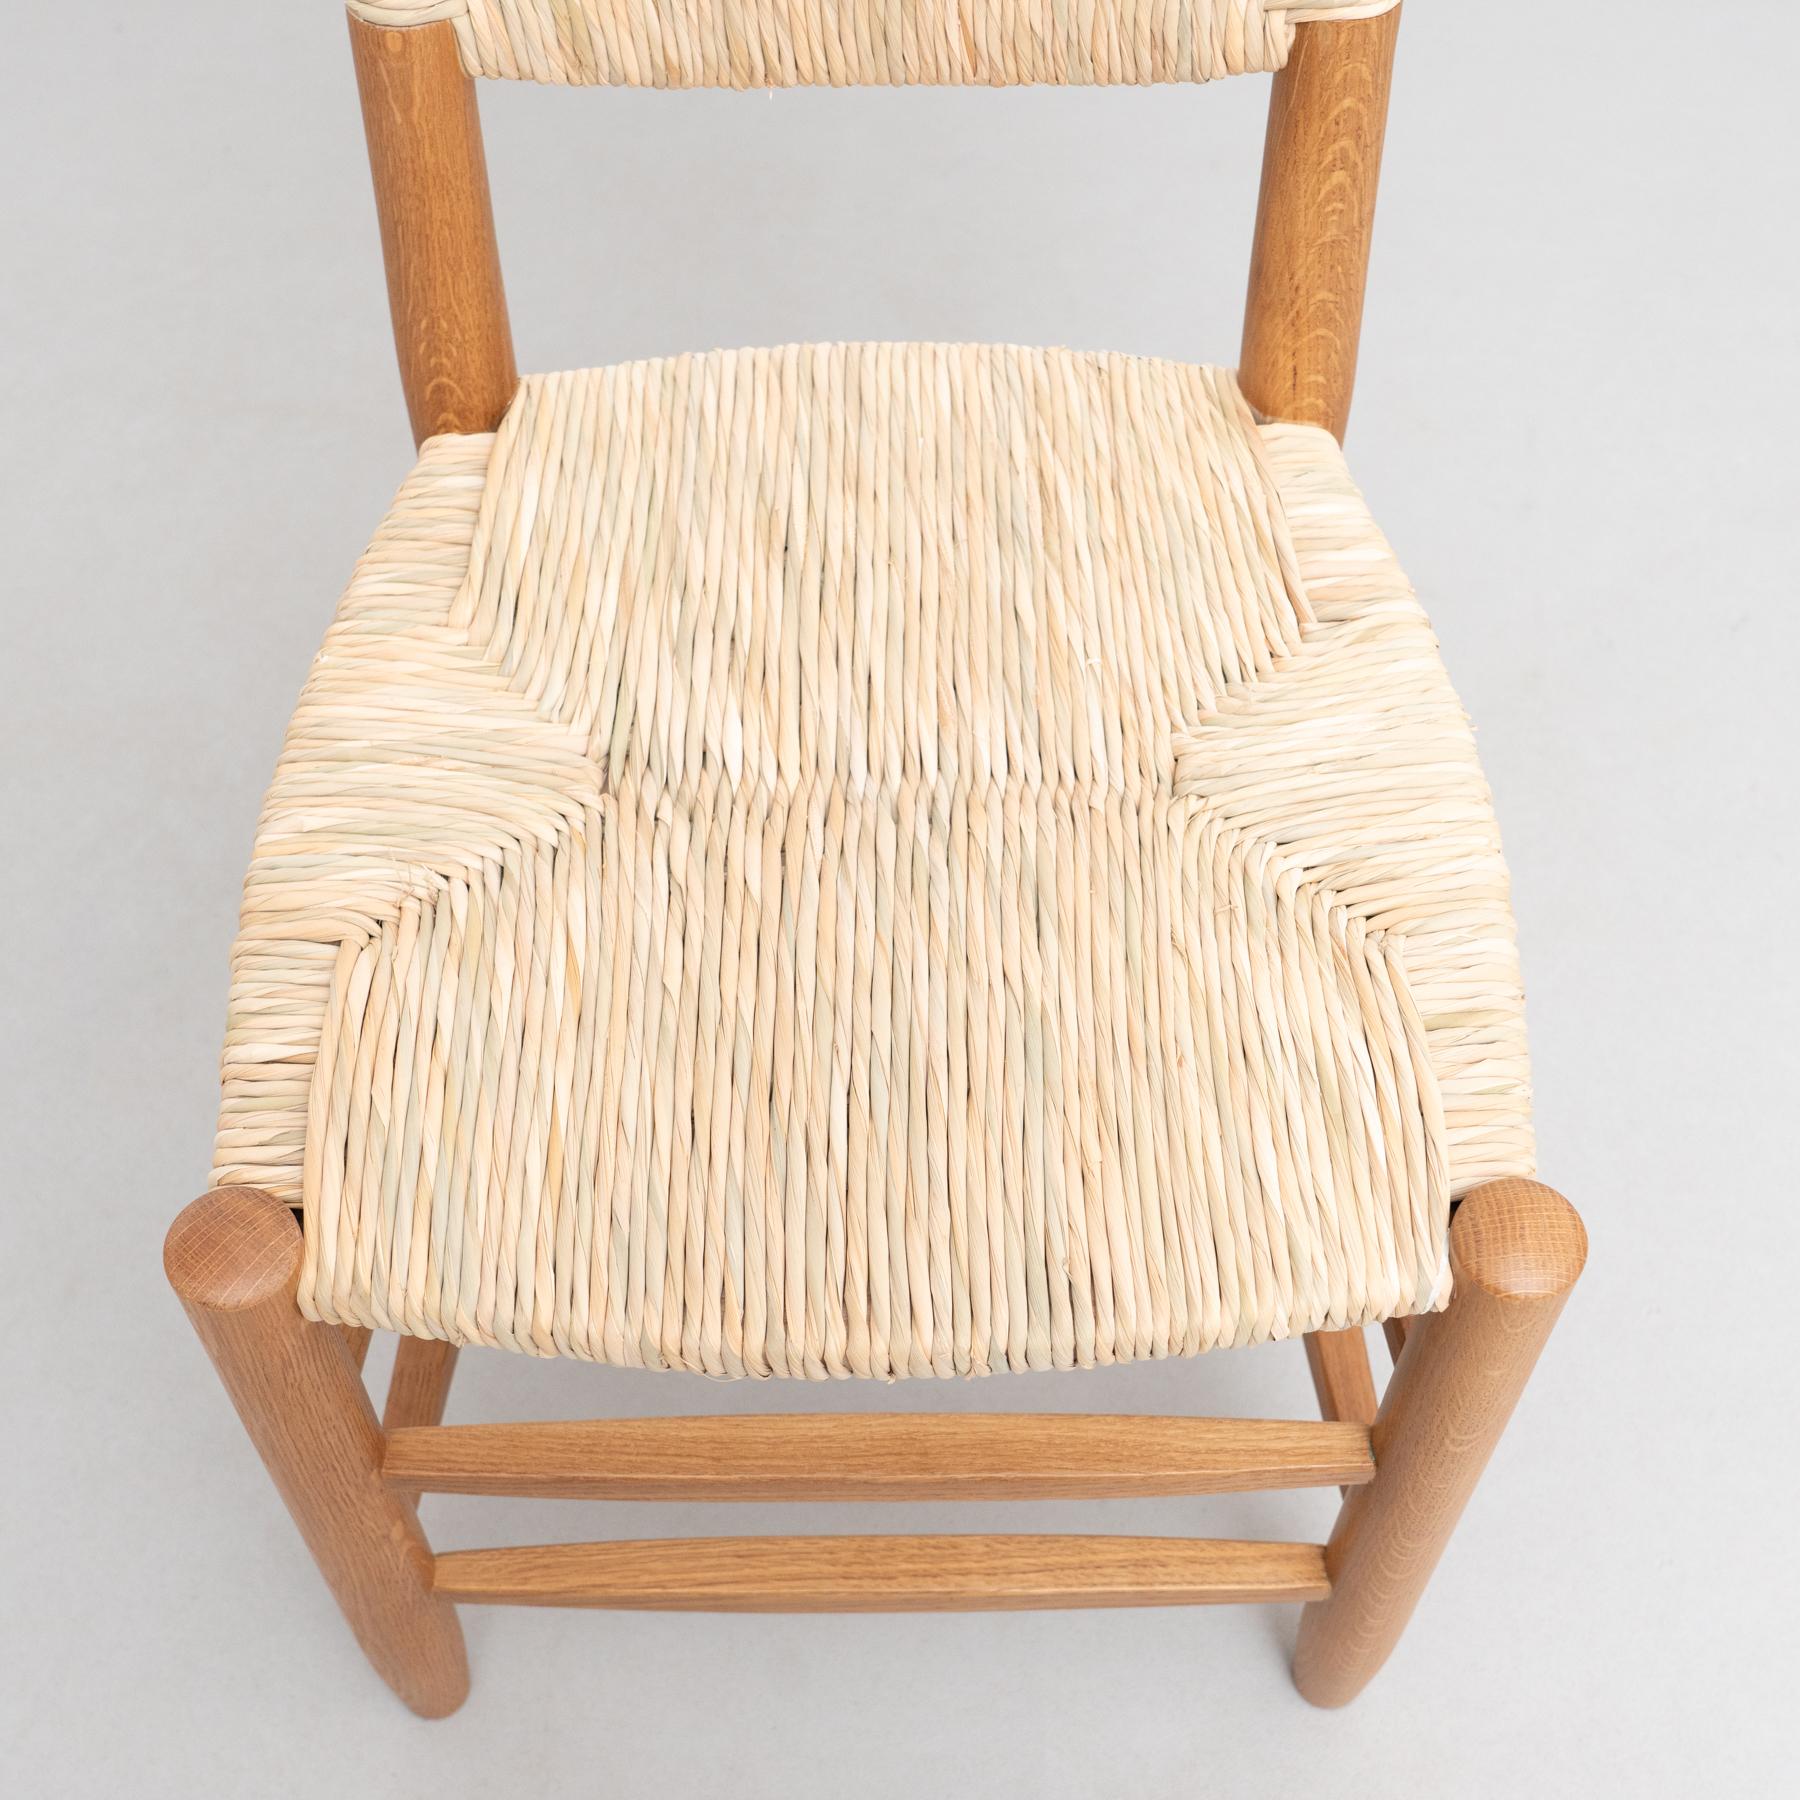 Set of 6 After Charlotte Perriand n.19 Chairs, Wood Rattan, Mid-Century Modern For Sale 14